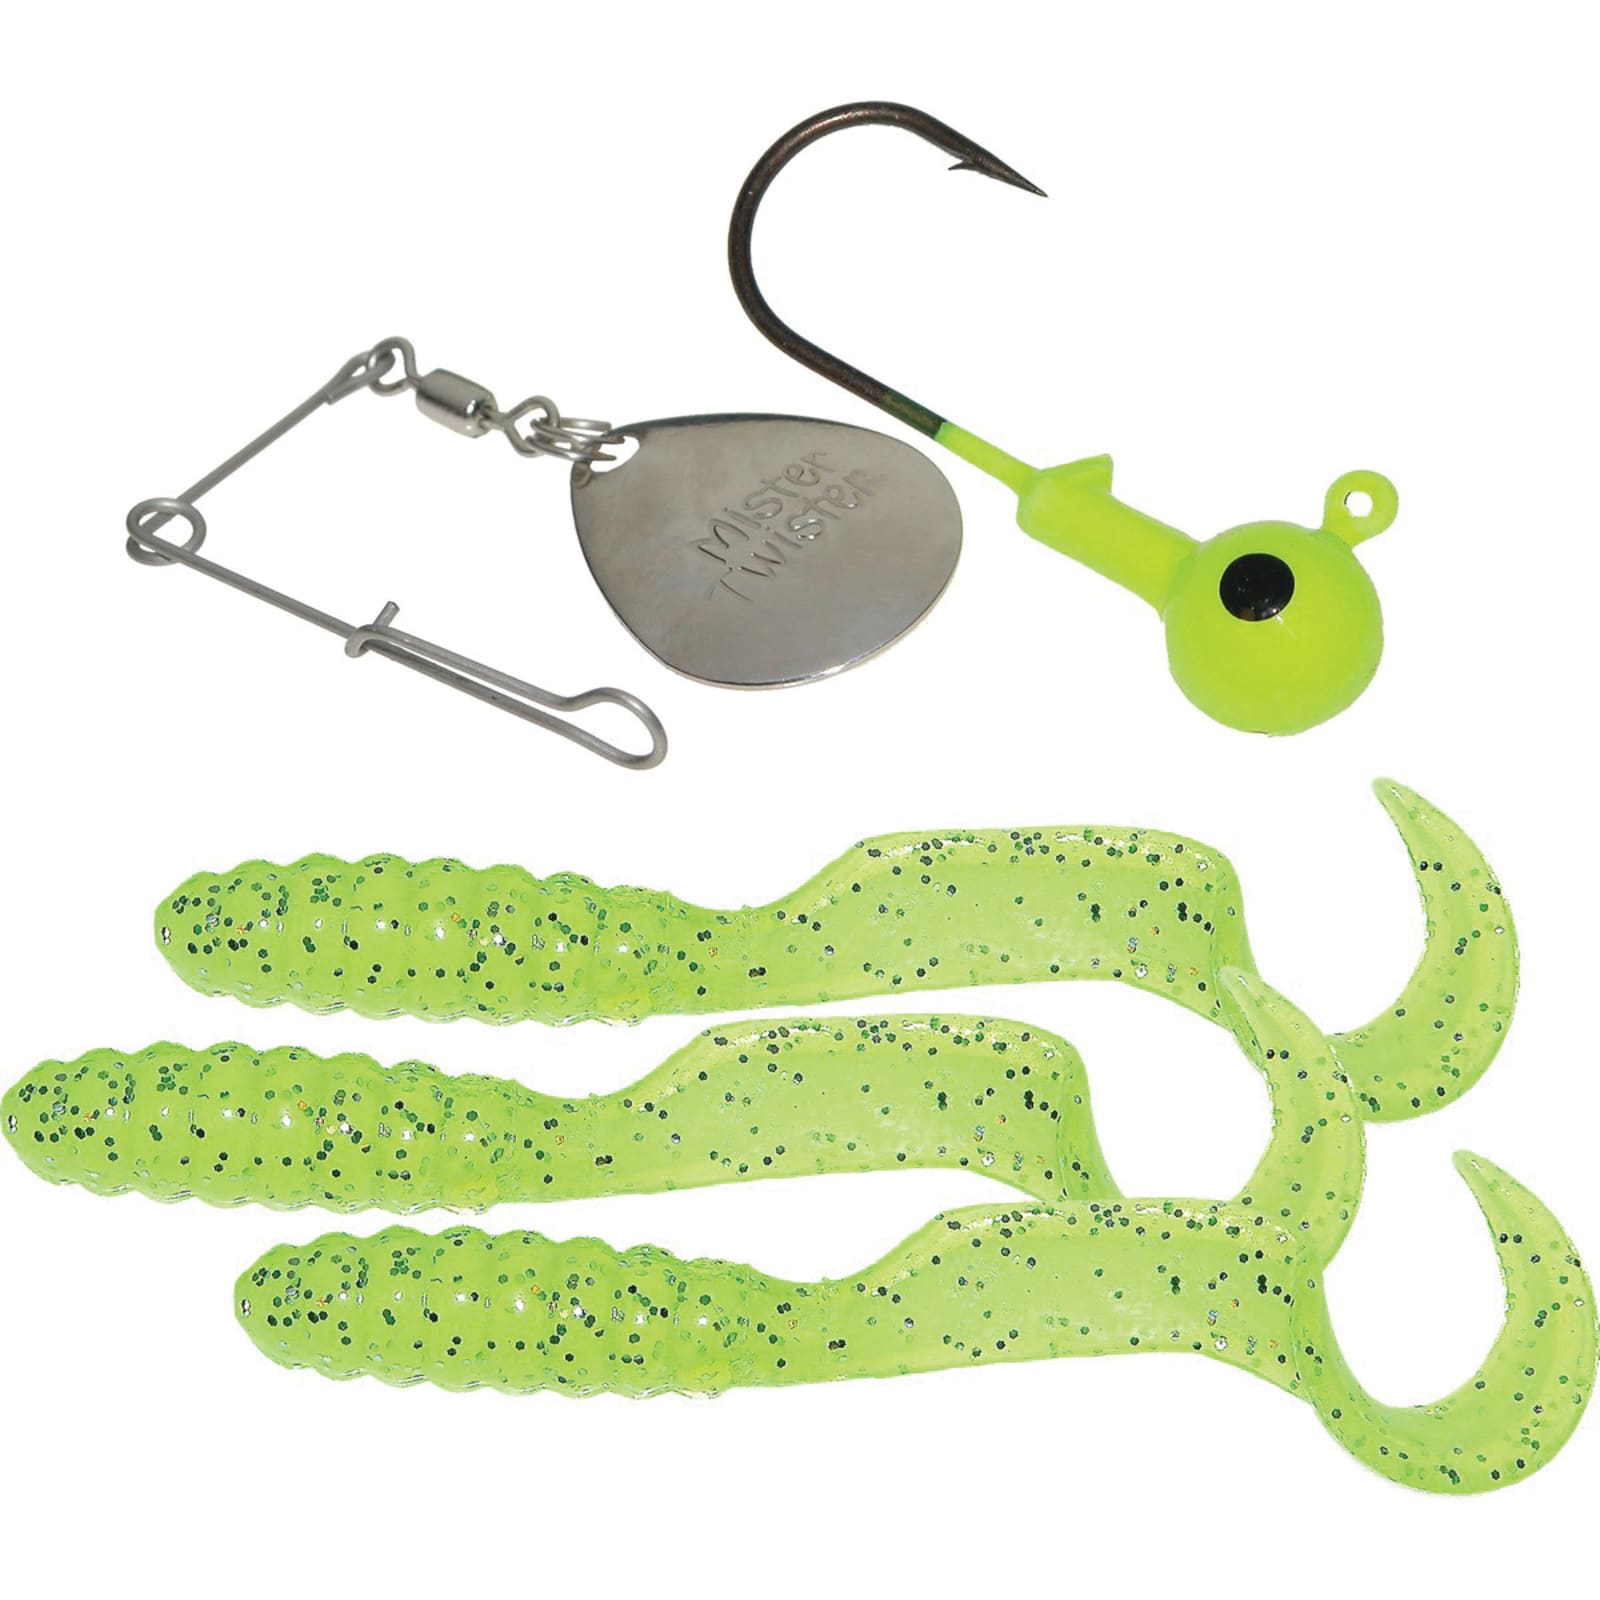 Teenie Grub Spin Combo - Neon Chartreuse by Mister Twister at